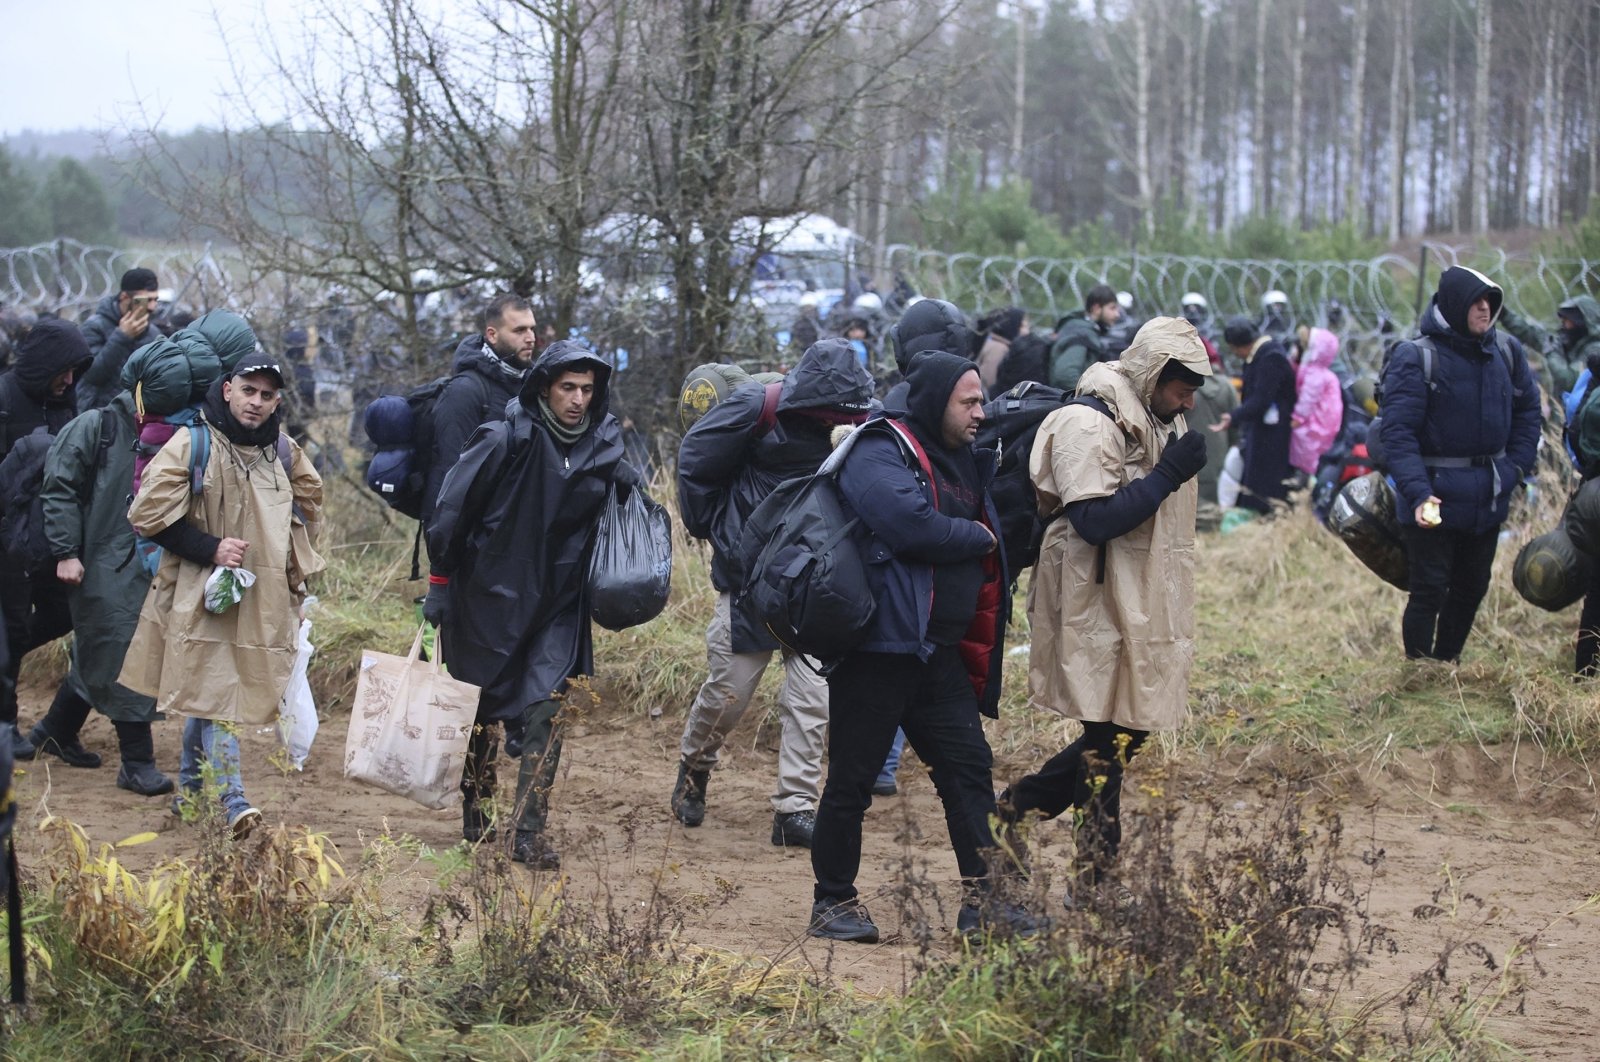 Migrants from the Middle East and elsewhere gather at the Belarus-Poland border near Grodno, Belarus, Nov. 8, 2021. (AP Photo)